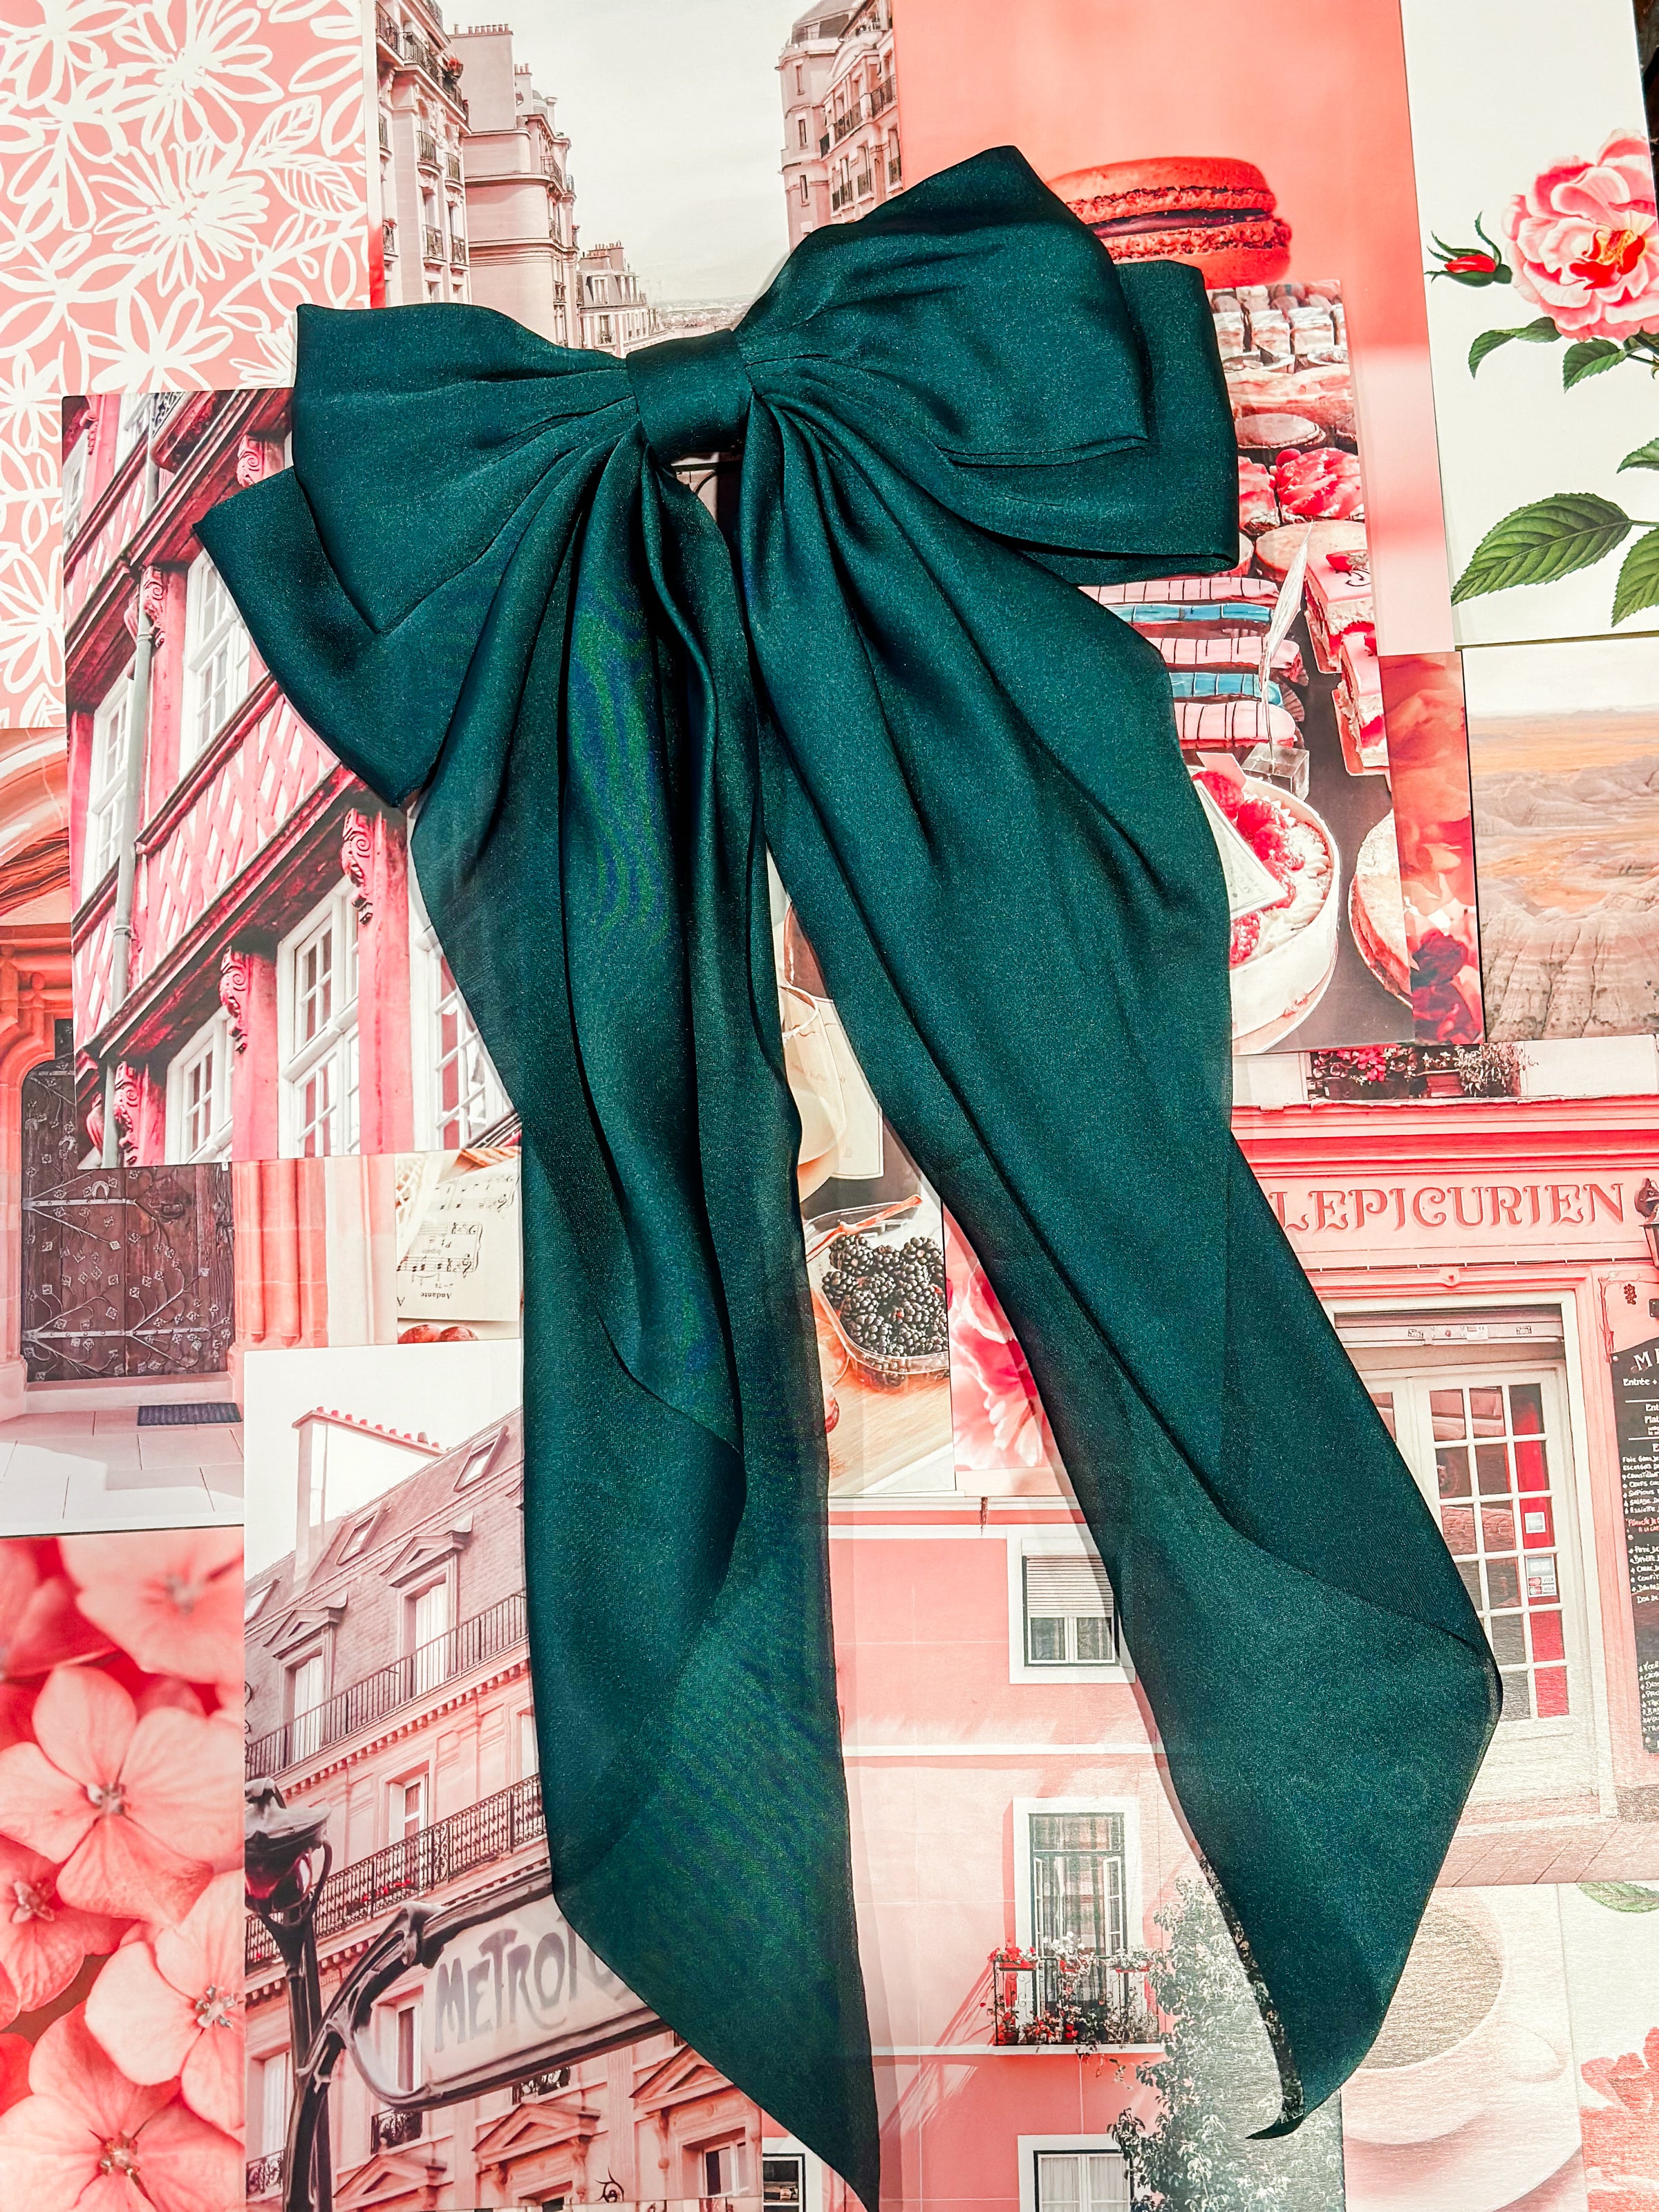 Oversized Satin Bow - Multiple Colors!